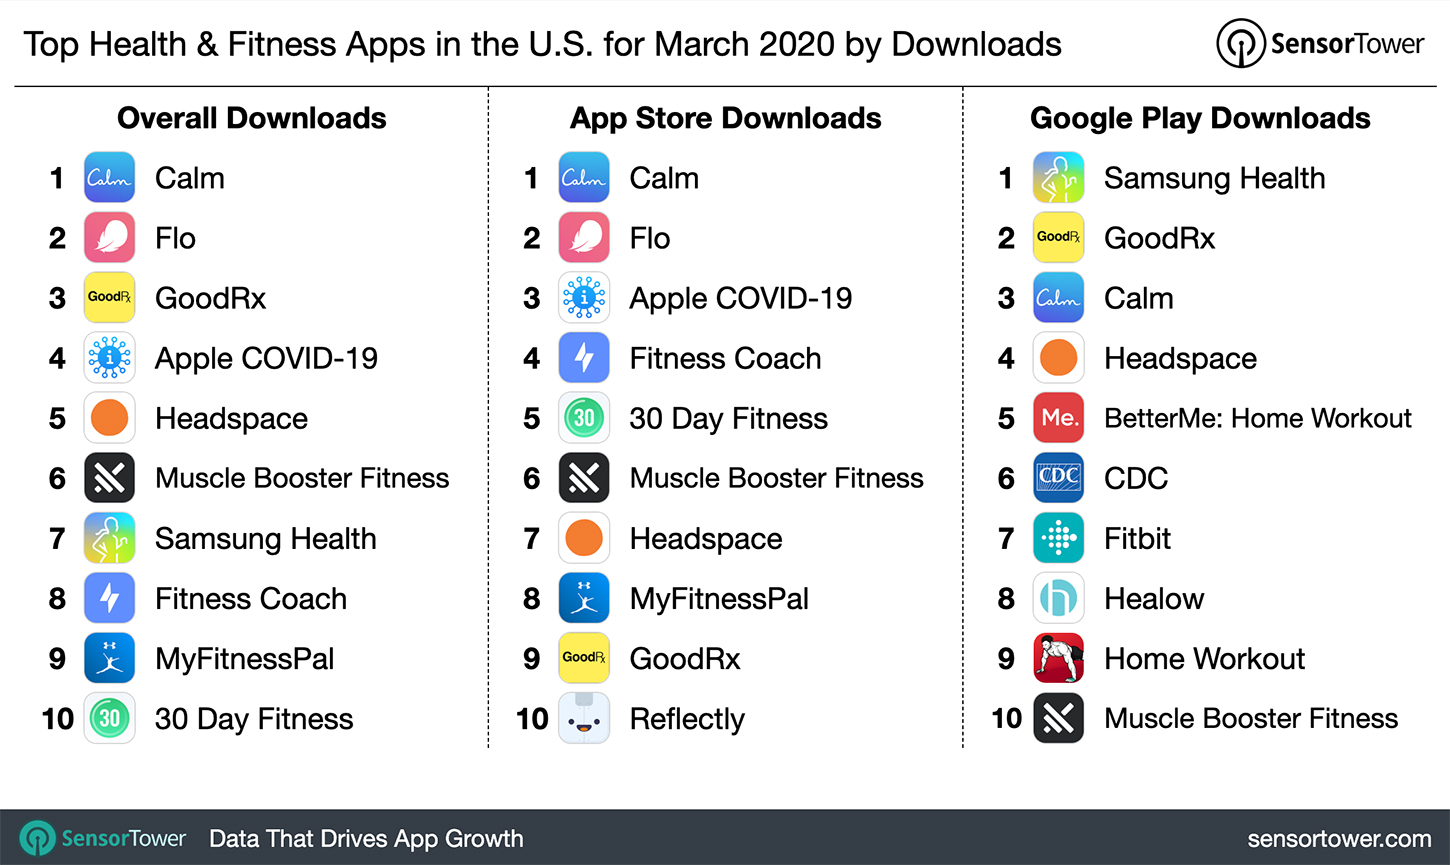 Top Health & Fitness Apps in the U.S. for March 2020 by Downloads